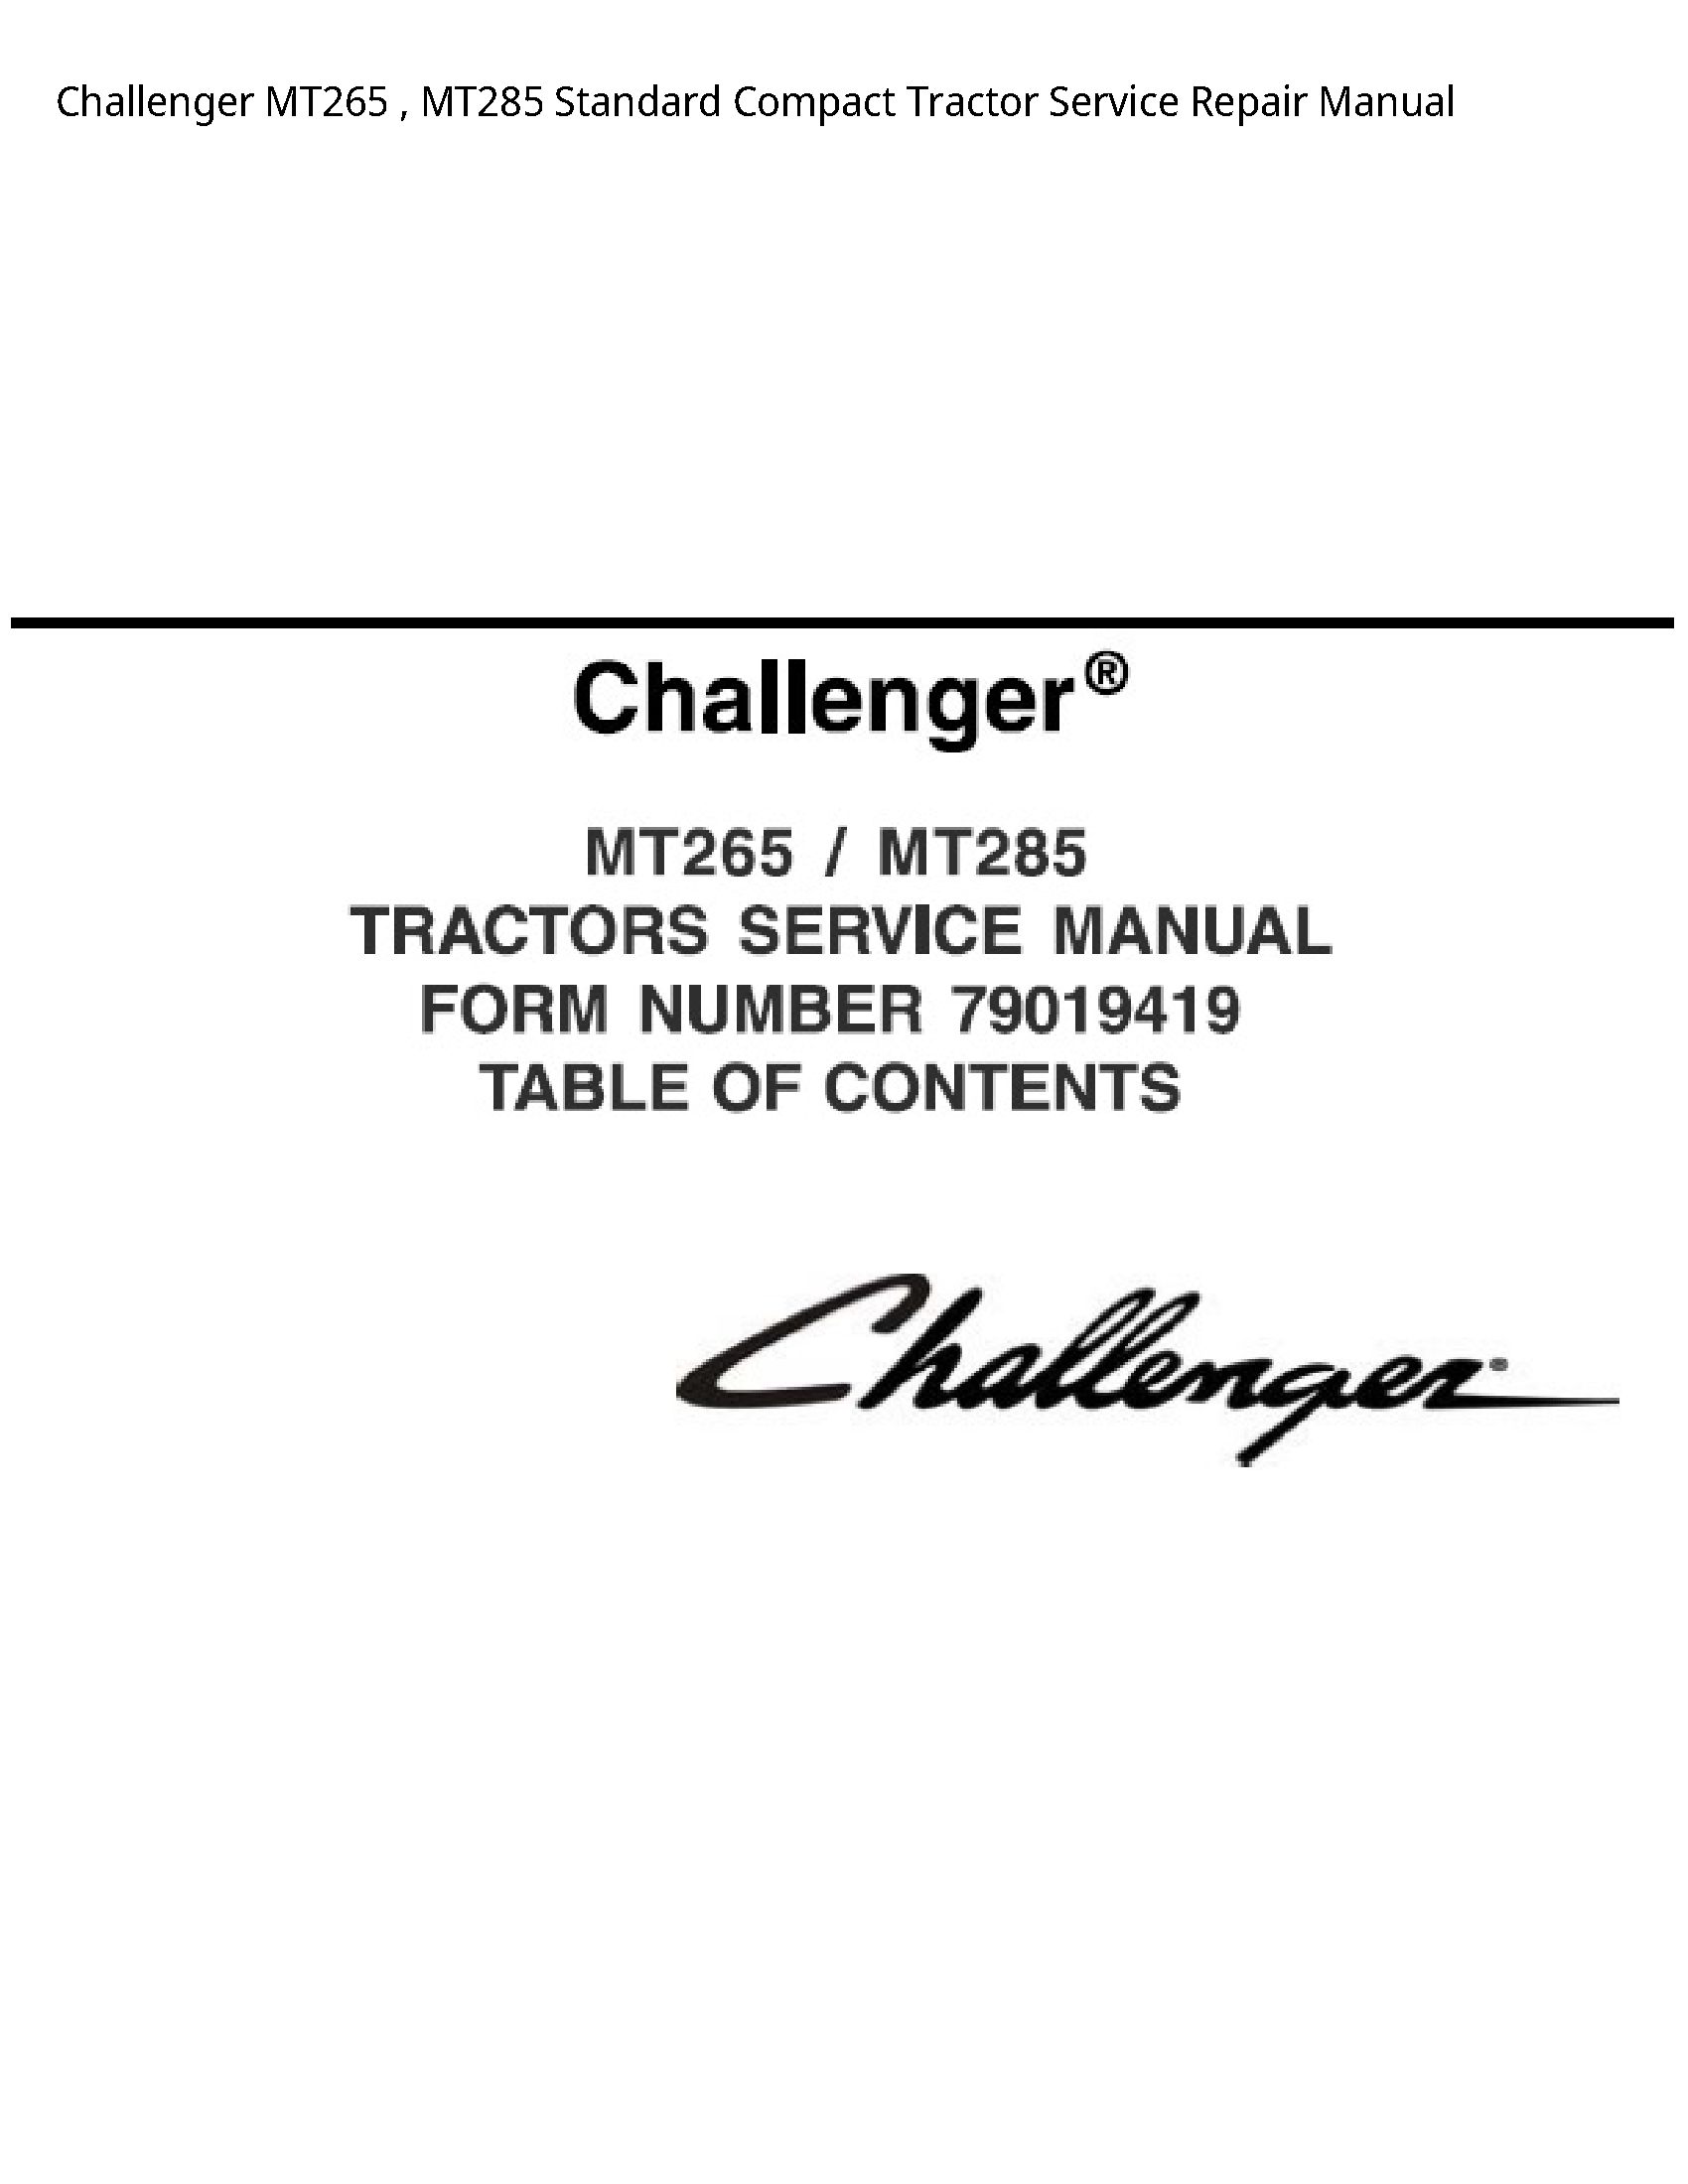 Challenger MT265 Standard Compact Tractor manual